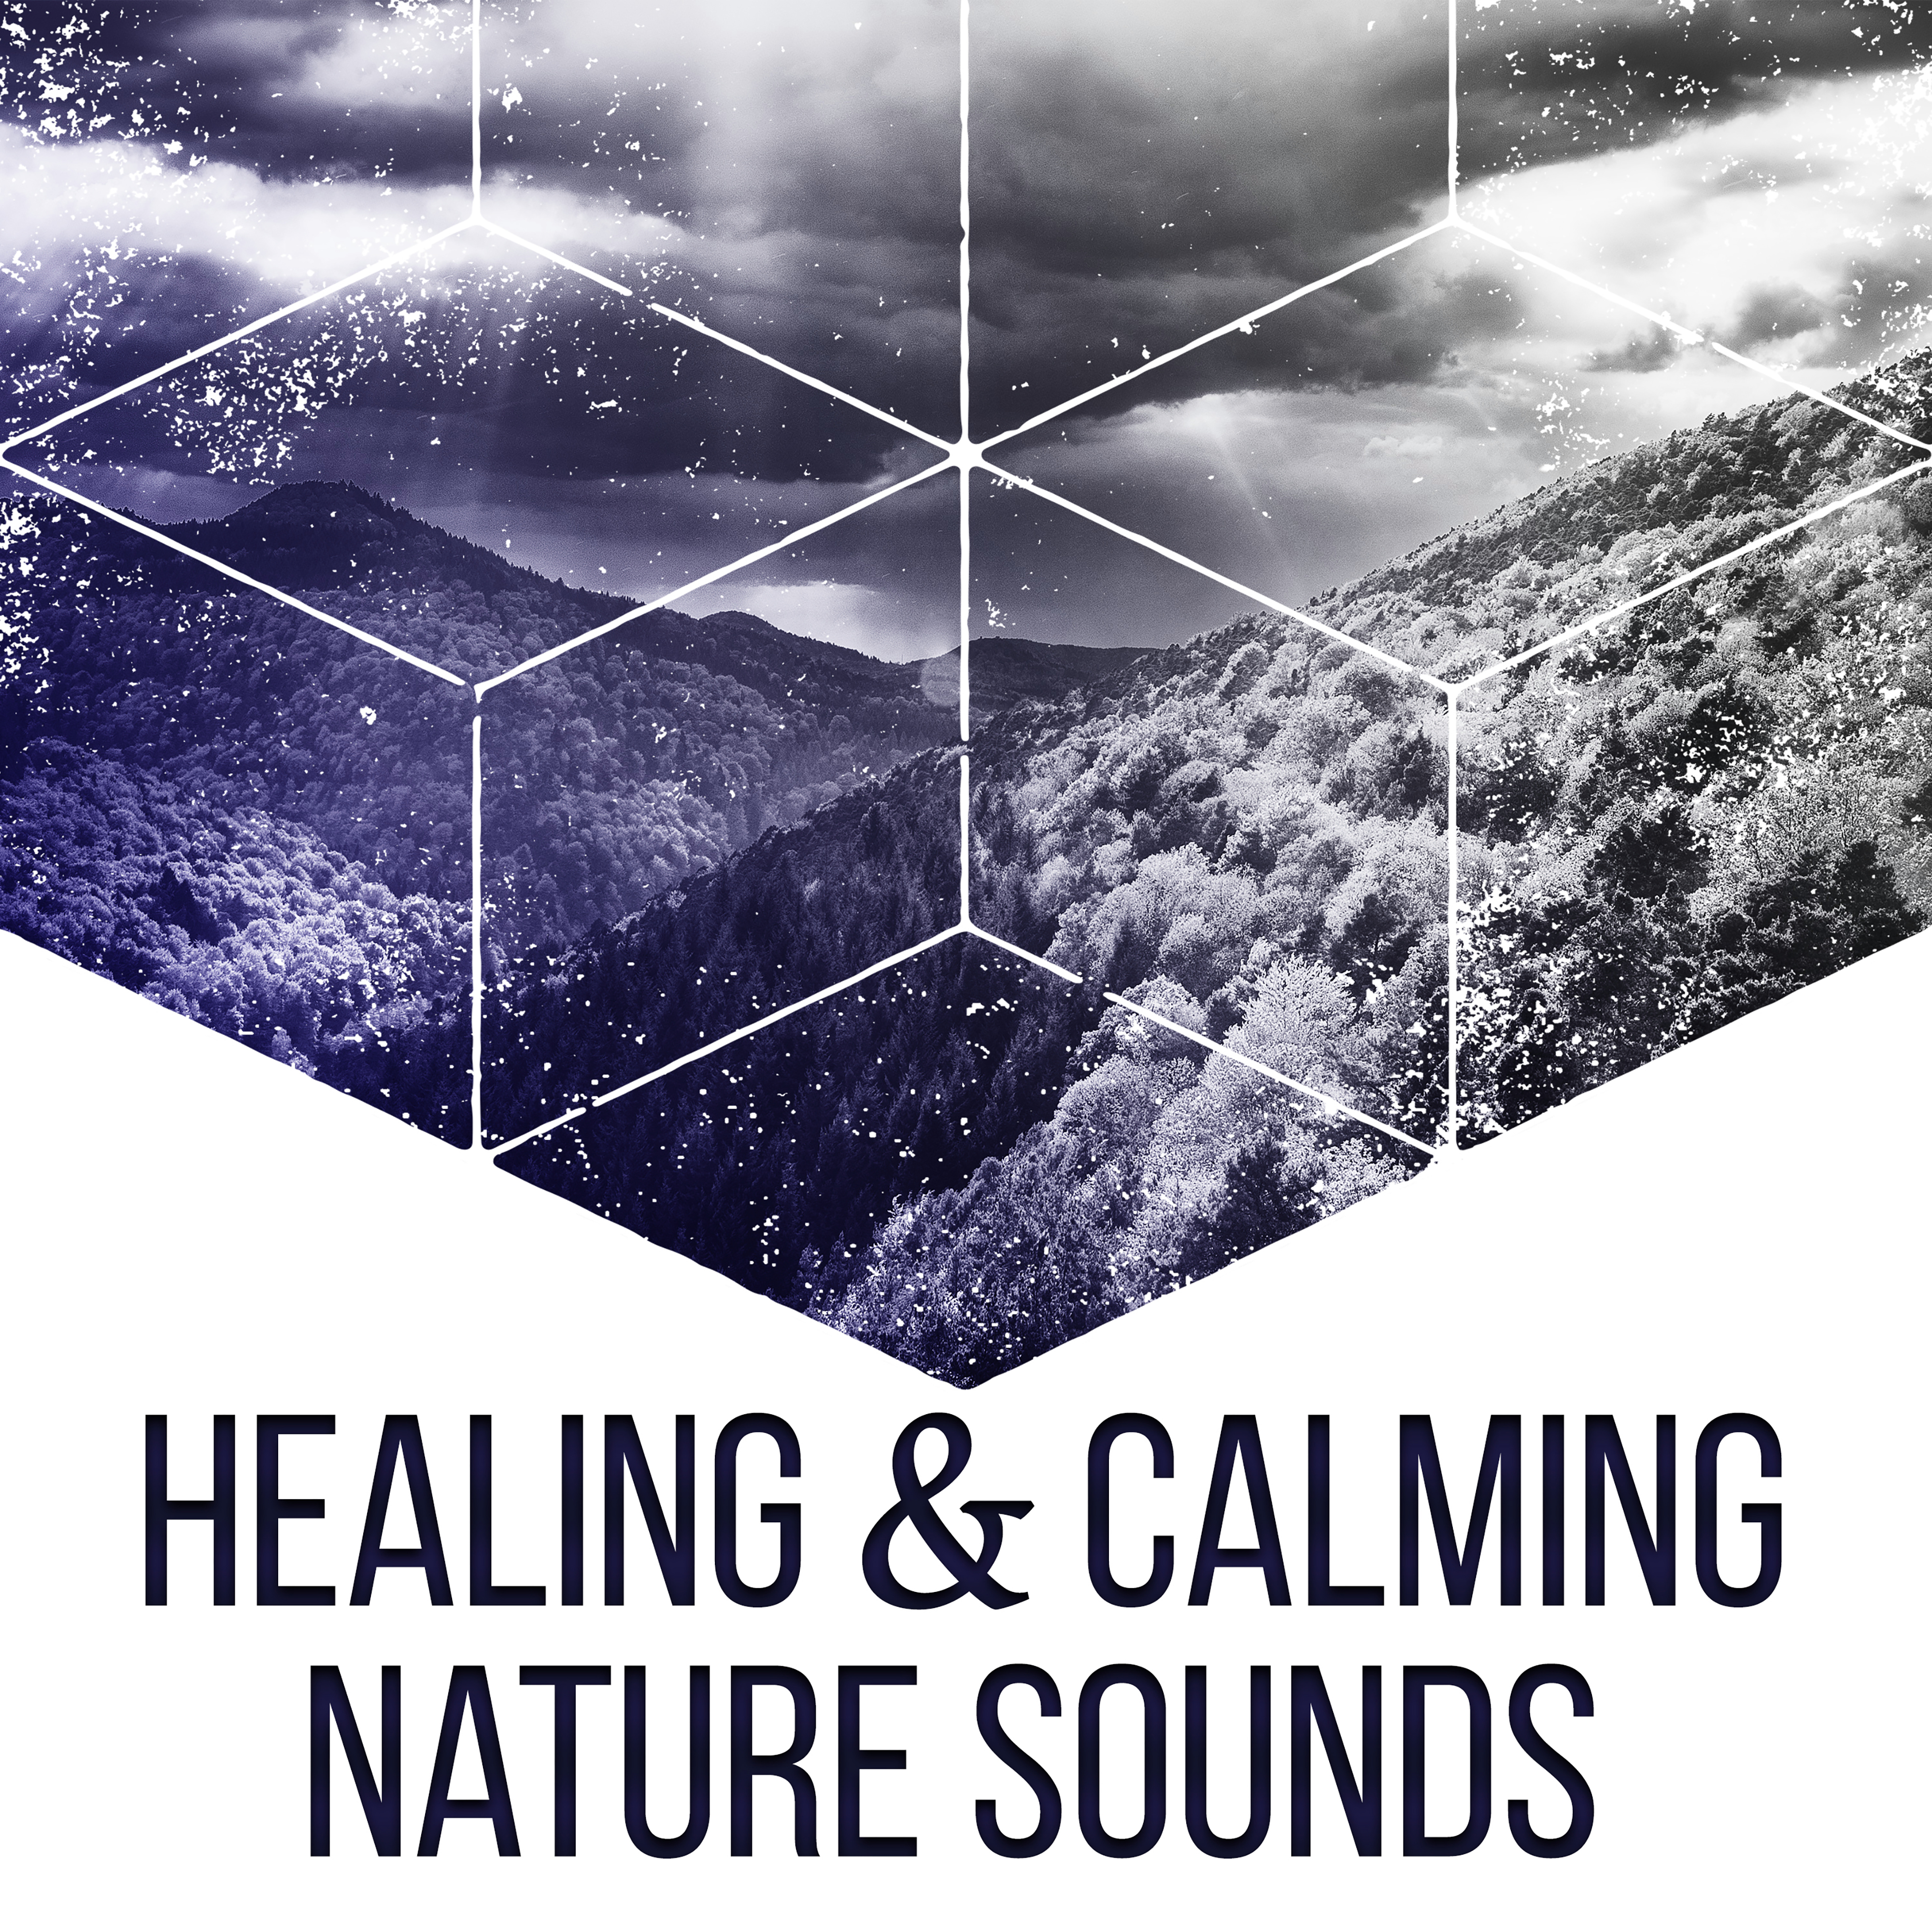 Healing & Calming Nature Sounds – Music to Rest, New Age Relaxation, Focus on Nature, Stress Free